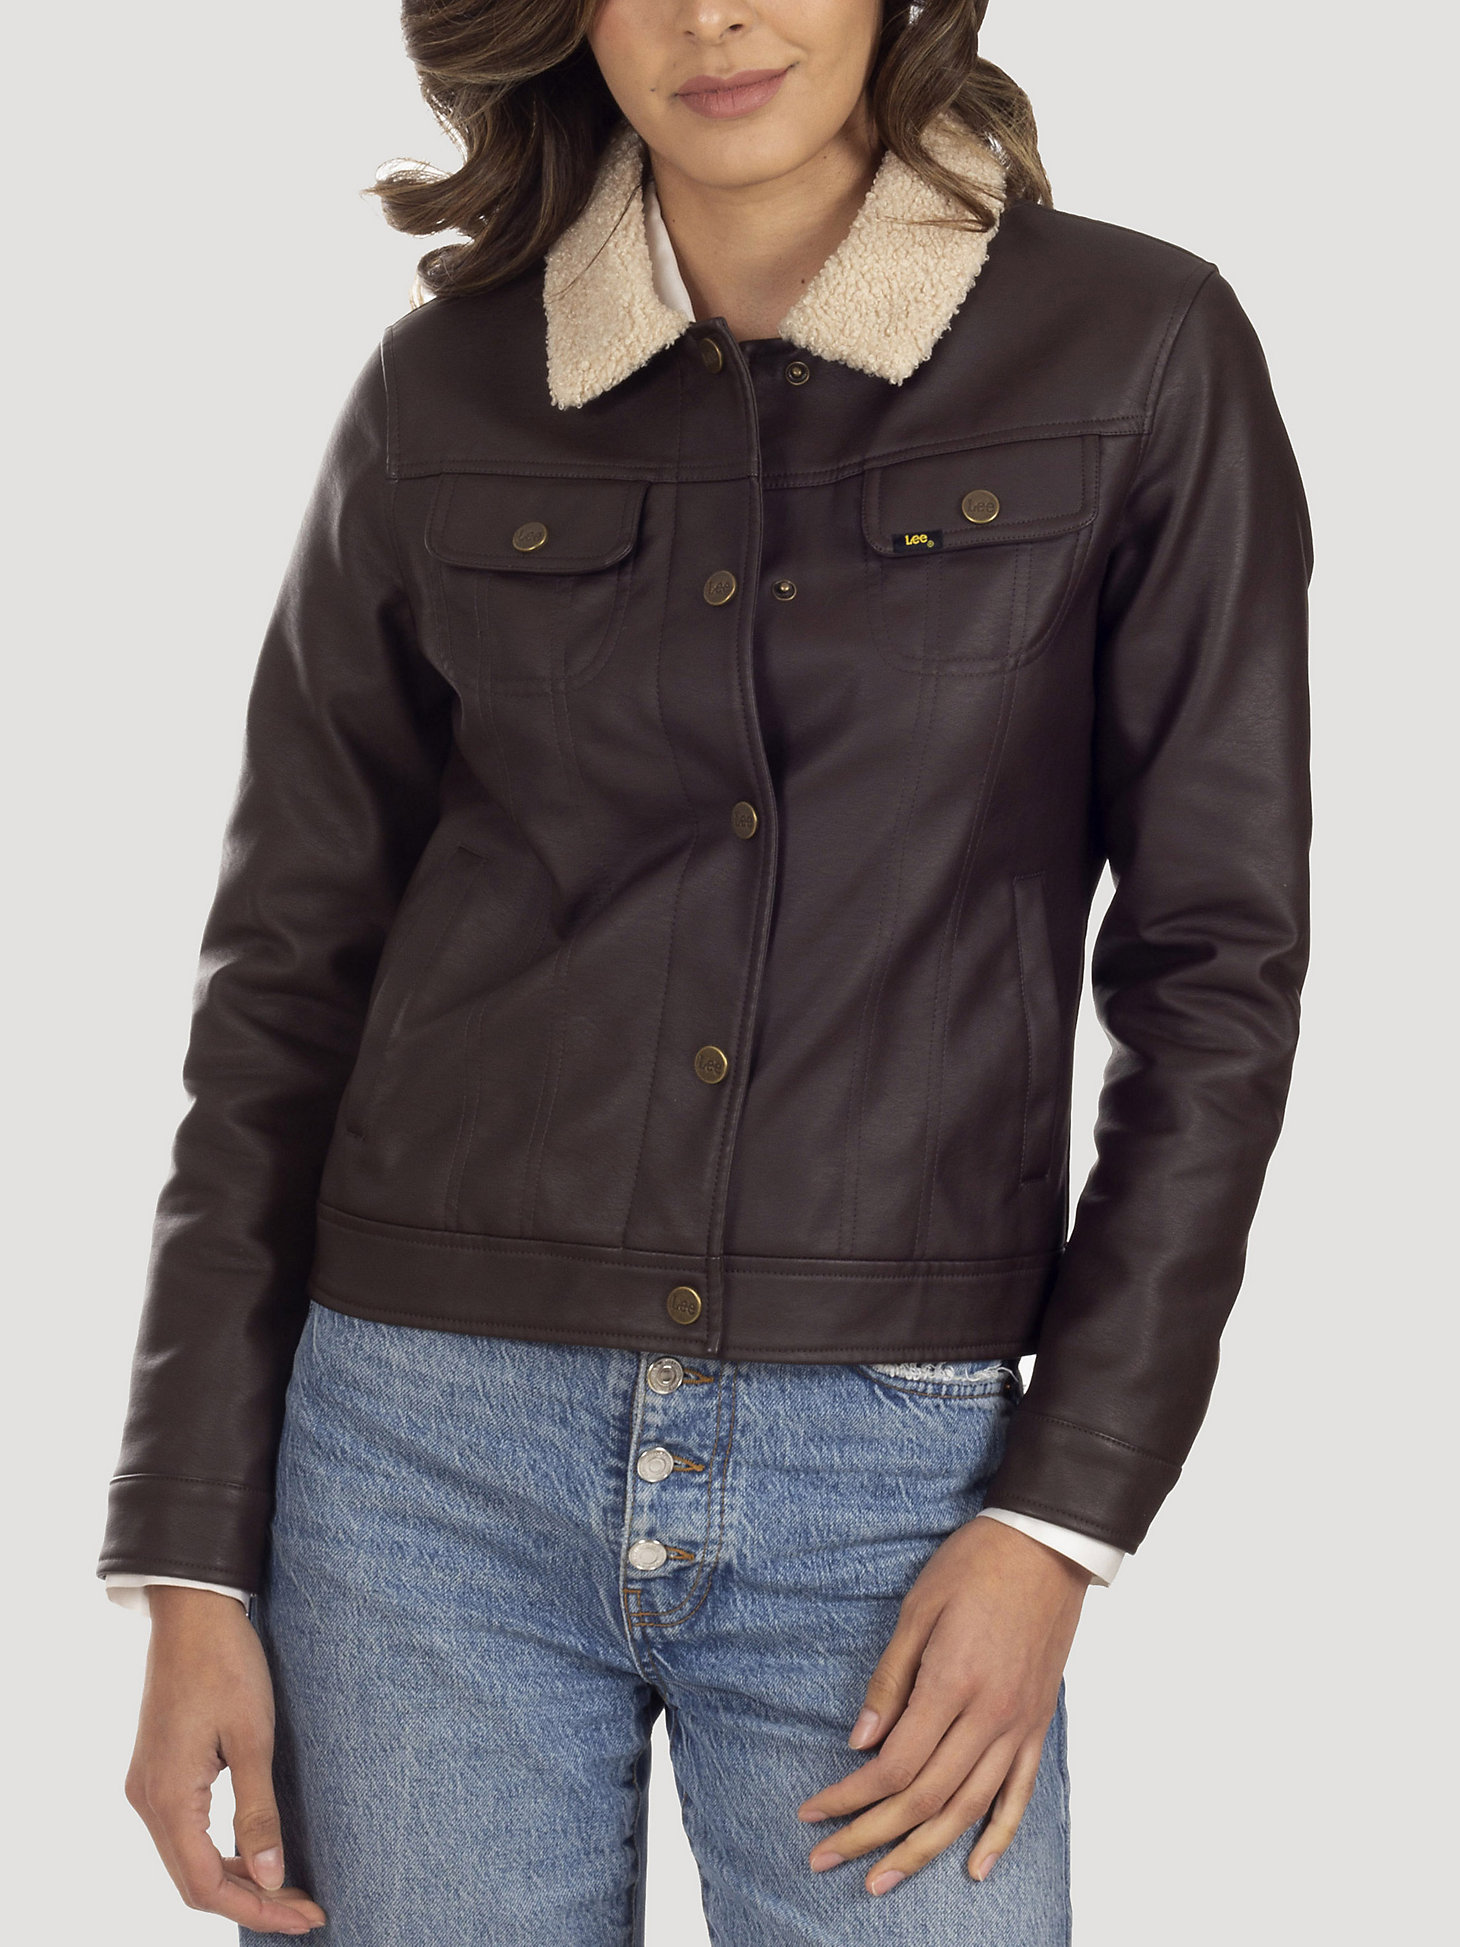 Women's Sherpa Collared Faux Leather Jacket  in Dark Brown alternative view 2